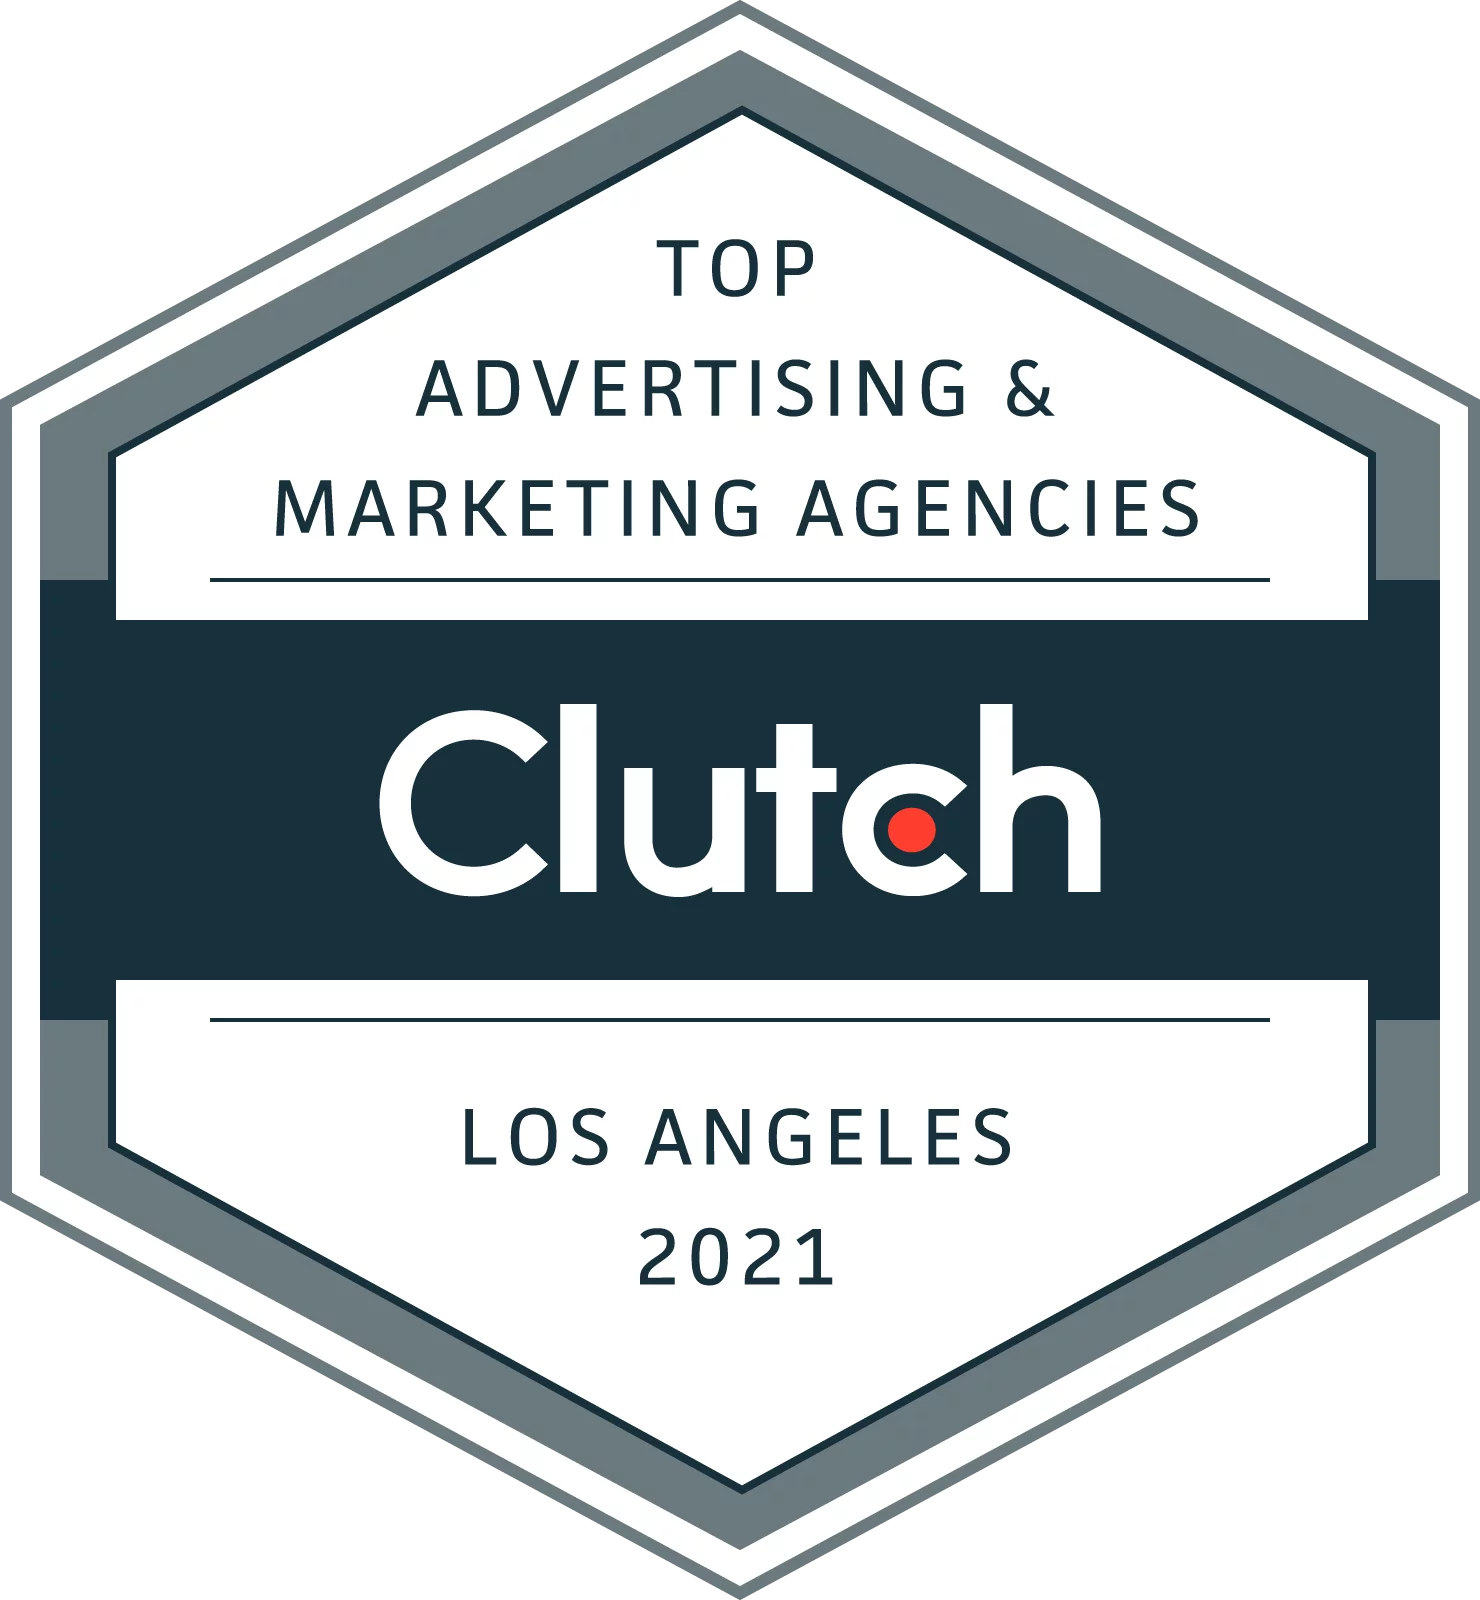 Sachs Marketing Group Named Top Social Media Marketing Company in LA on Clutch